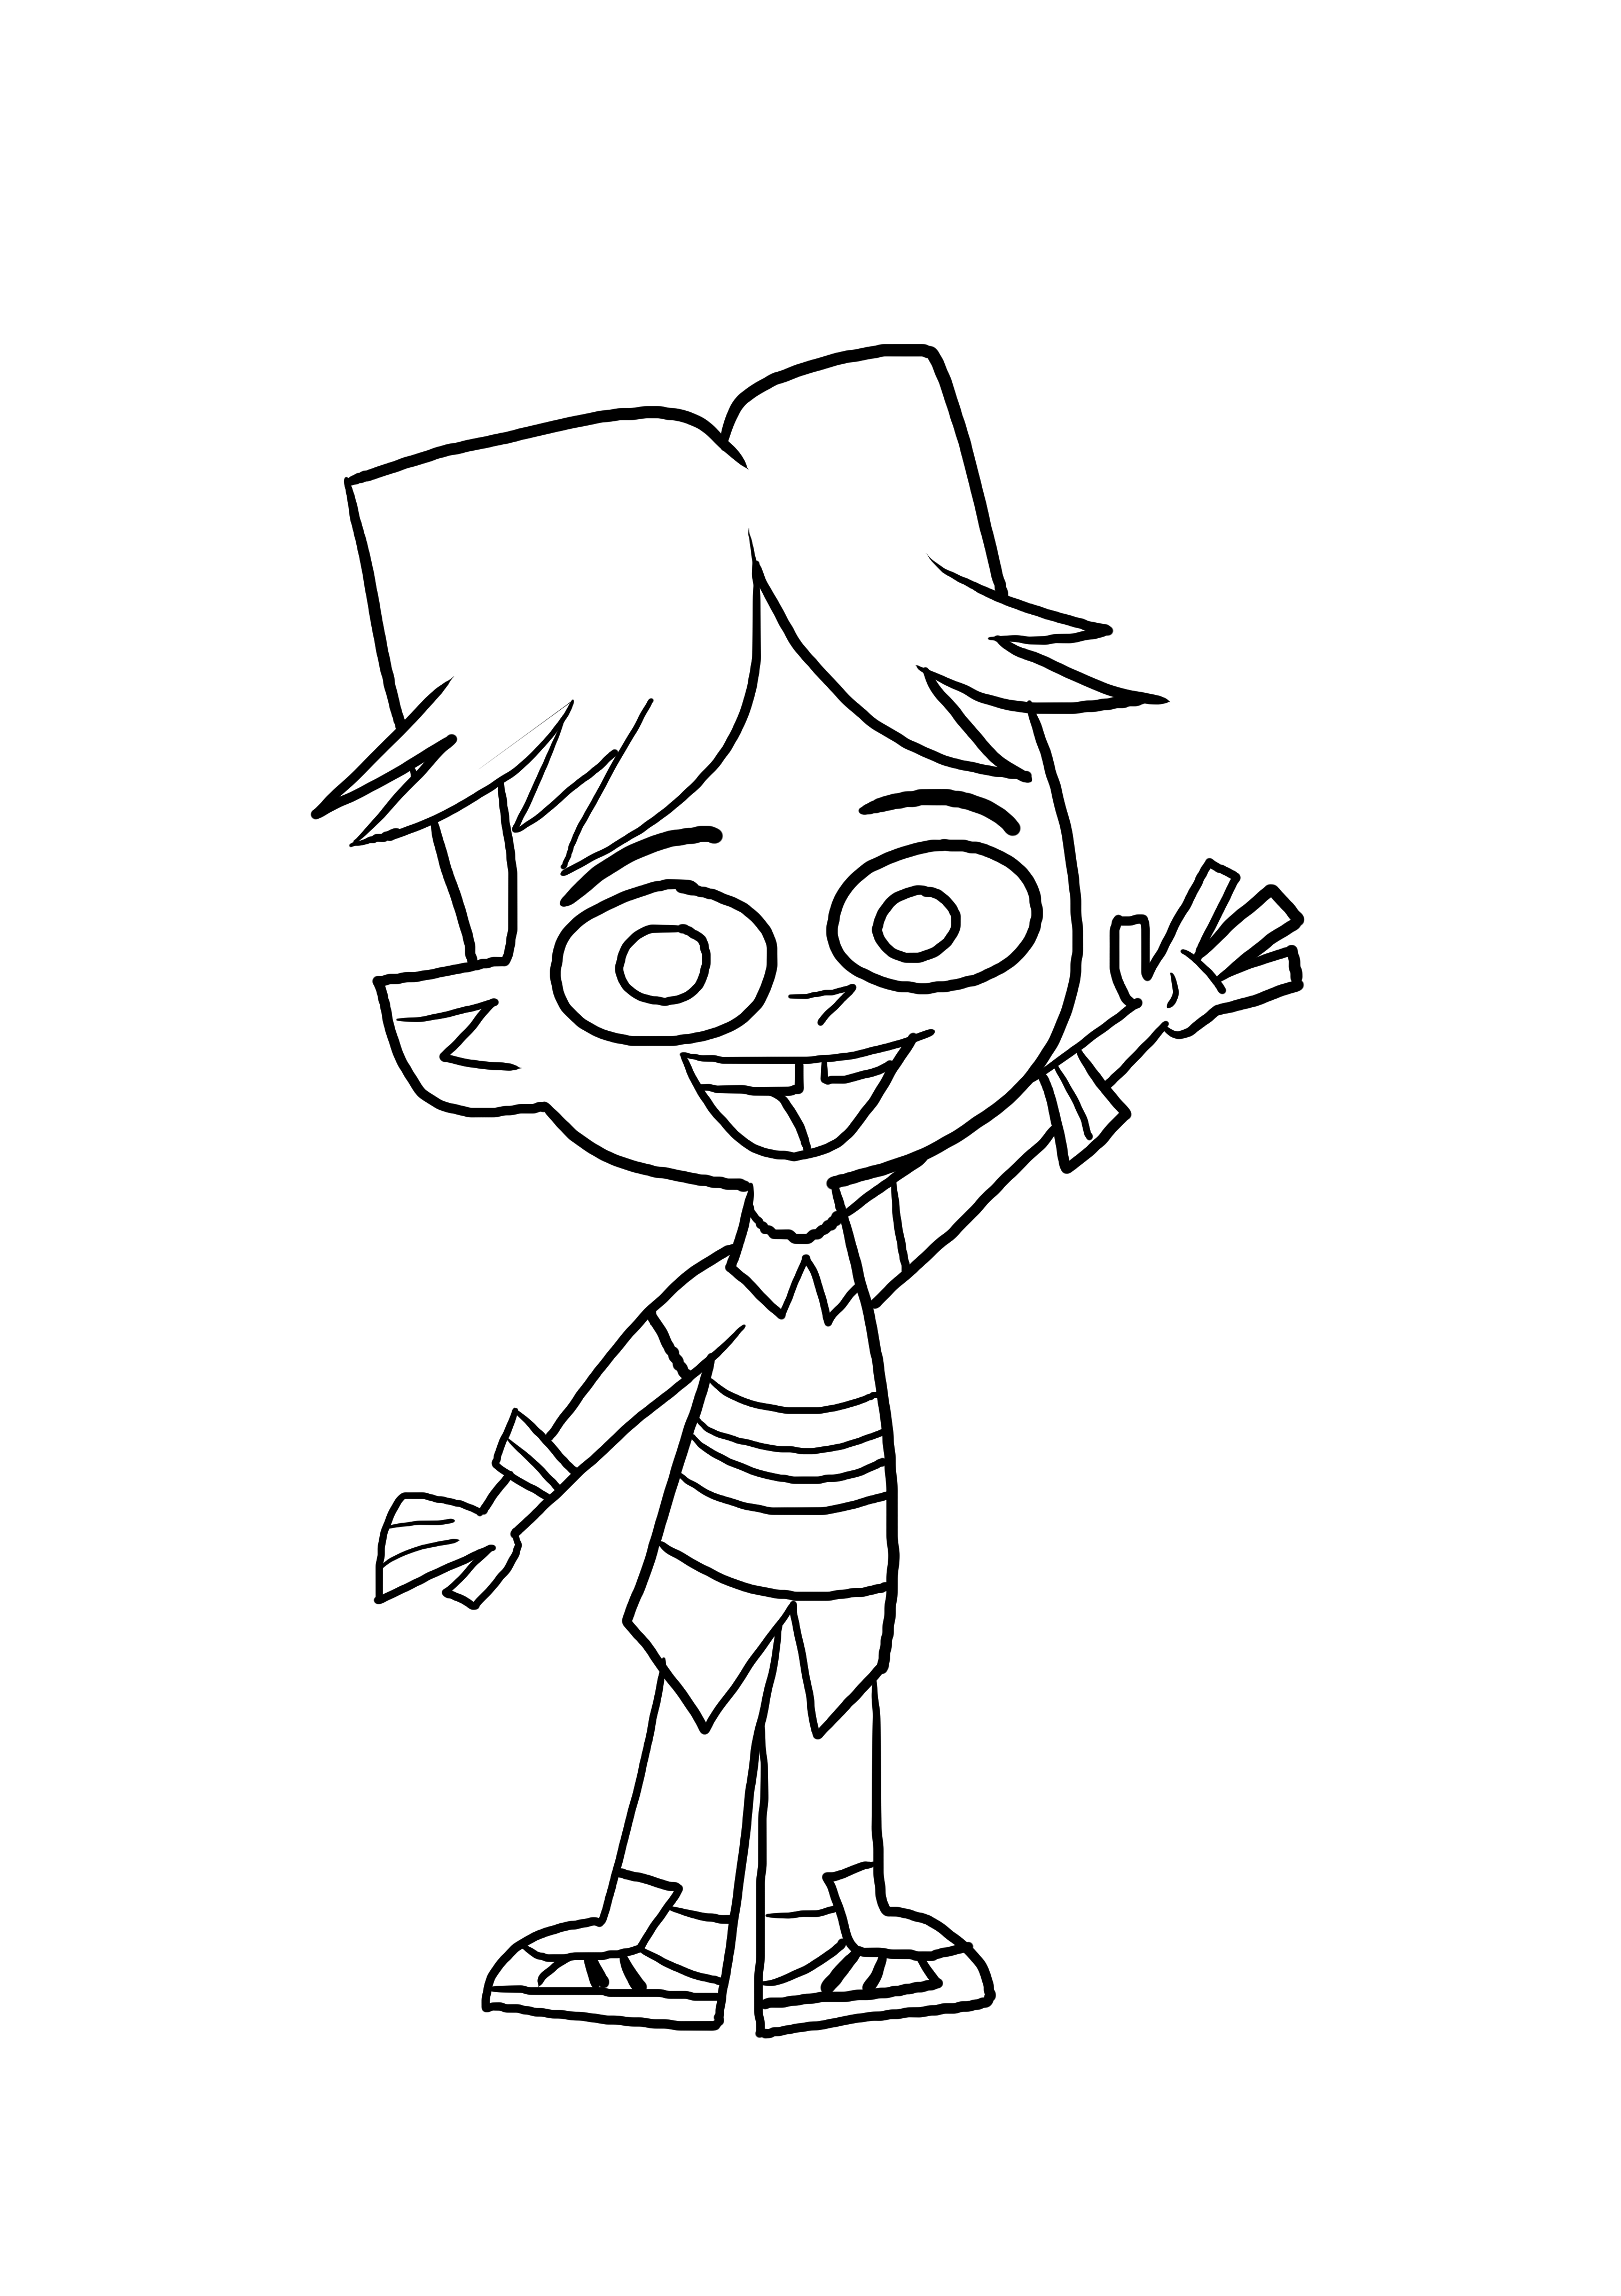 Cody from Total DramaRama coloring page to print and coloring